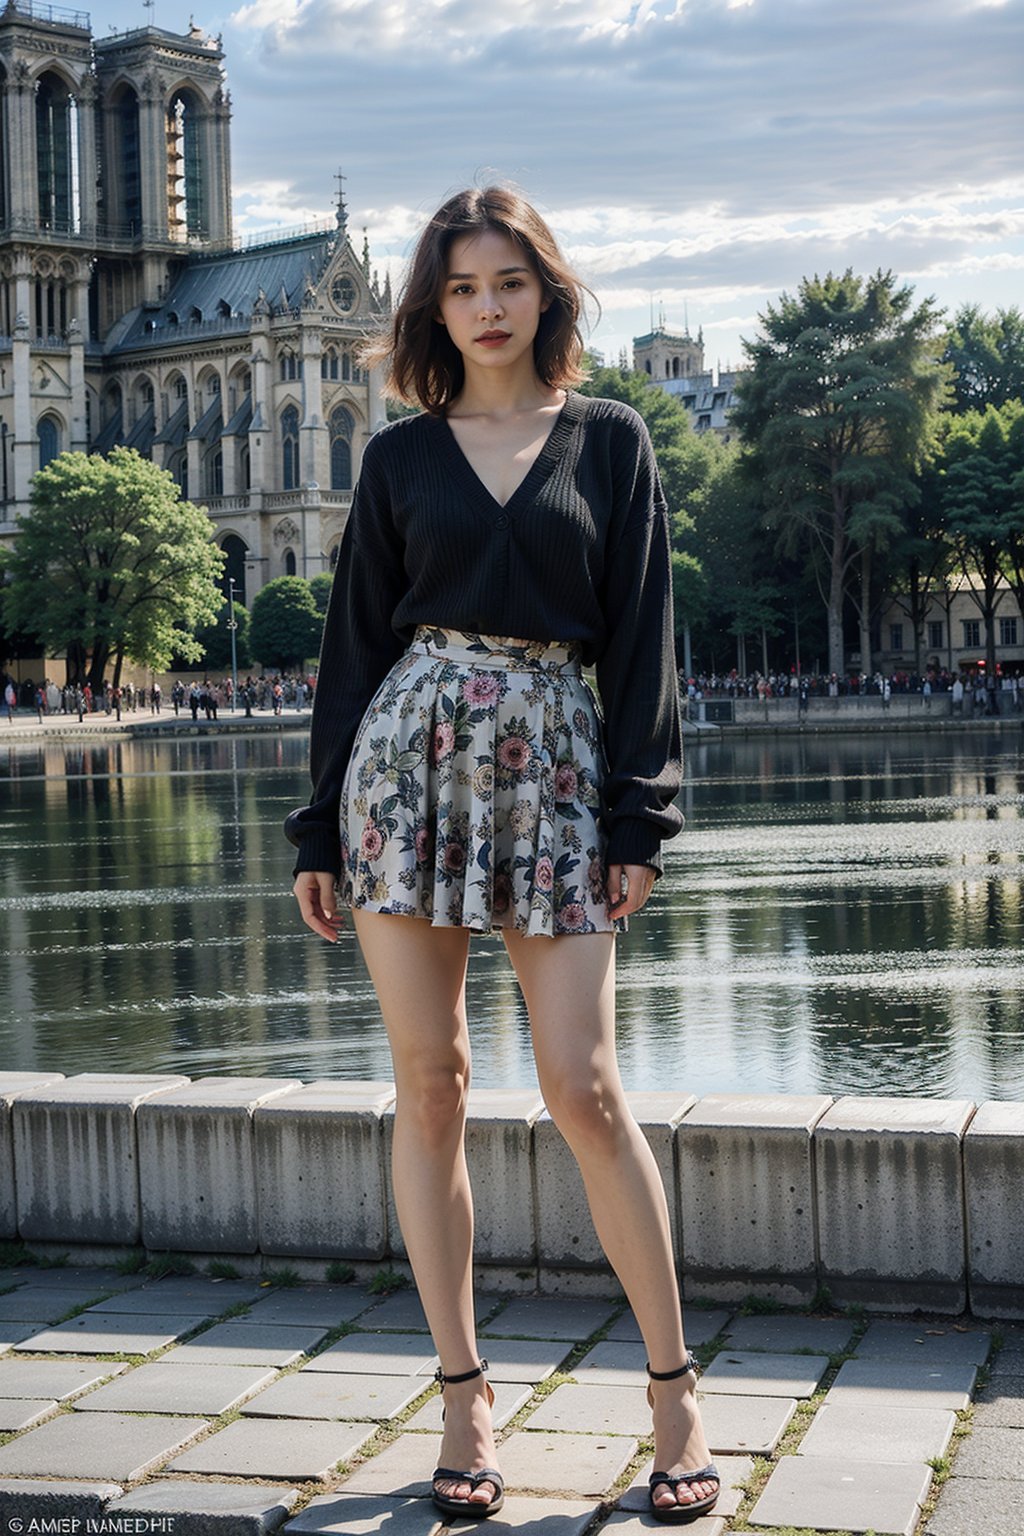 full body shot, Sayaka Yumi stands confidently in front of the Notre-Dame de Paris, The ensemble enhances her dynamic presence, blending a sense of energy with a poised, stylish demeanor, perfectly suited to her,